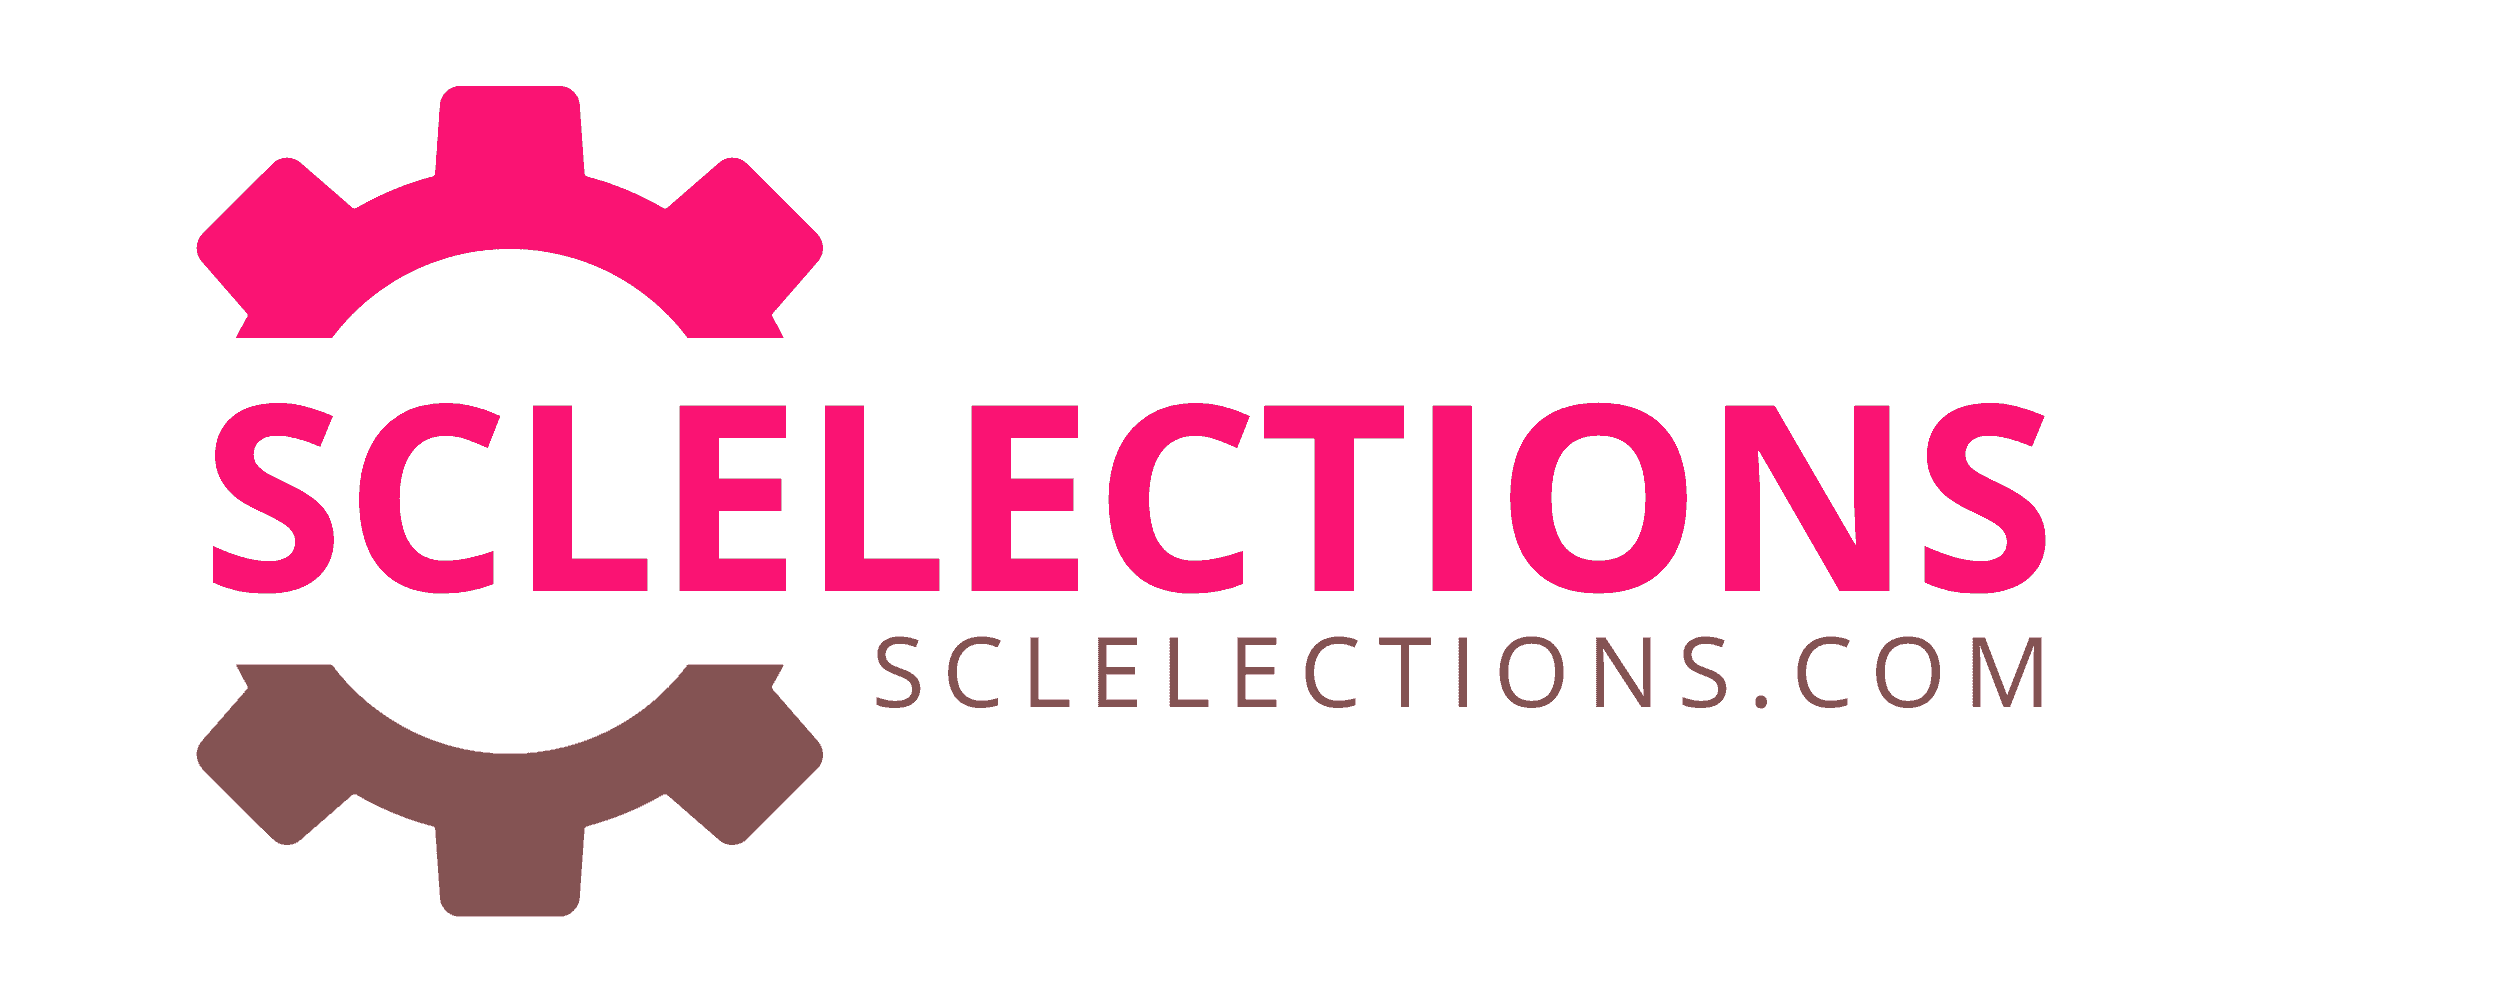 Sclelection